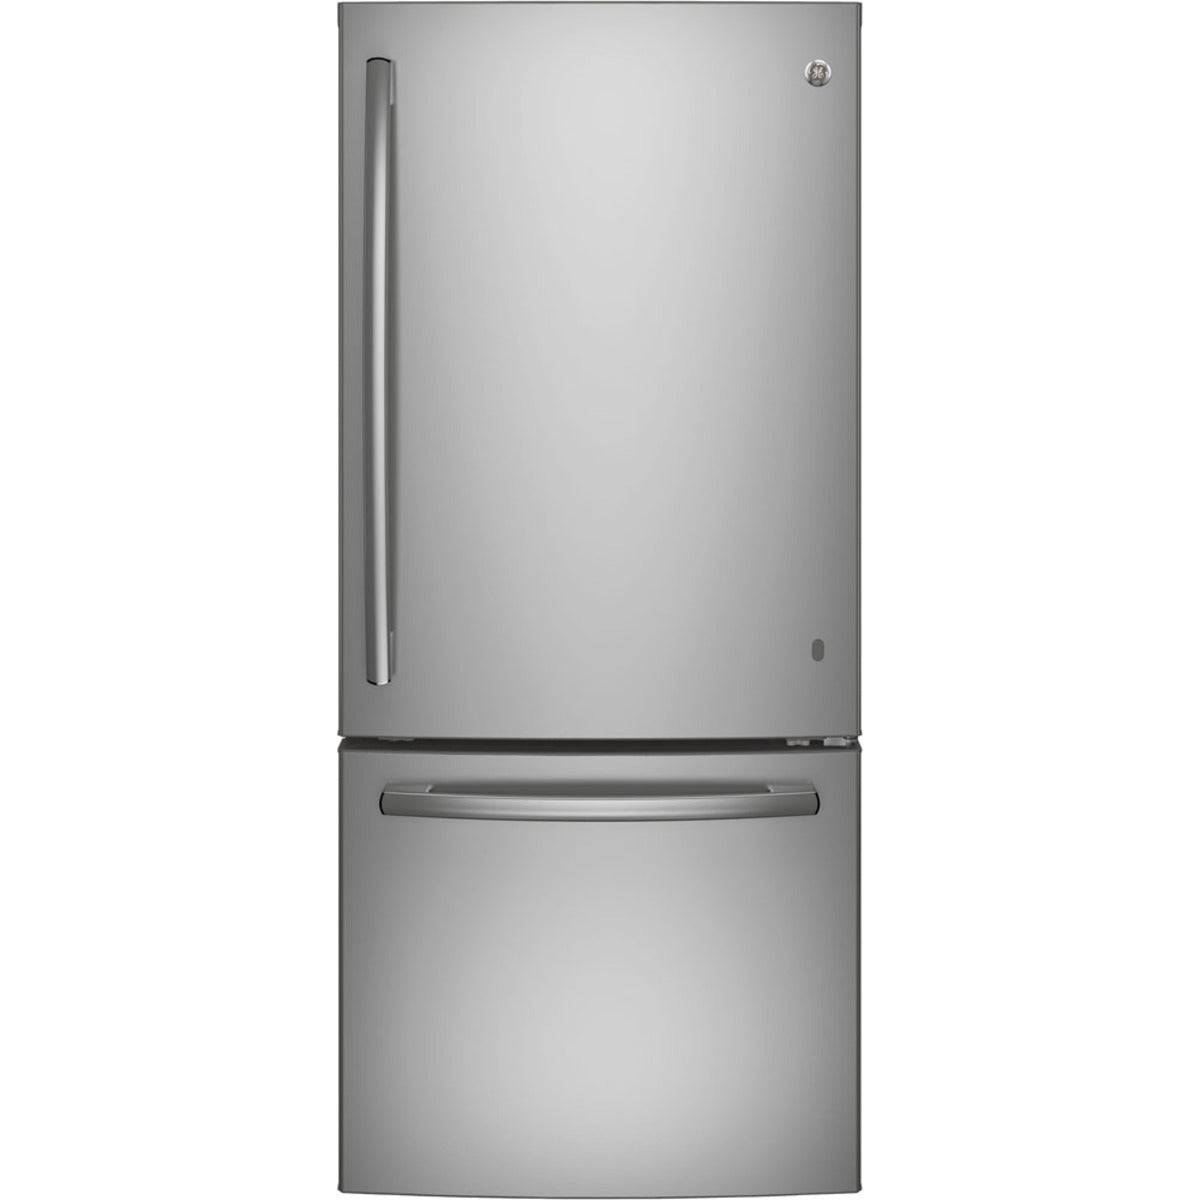 GE - 29.75 Inch 20.9 cu. ft Bottom Mount Refrigerator in Stainless - GBE21AYRKFS